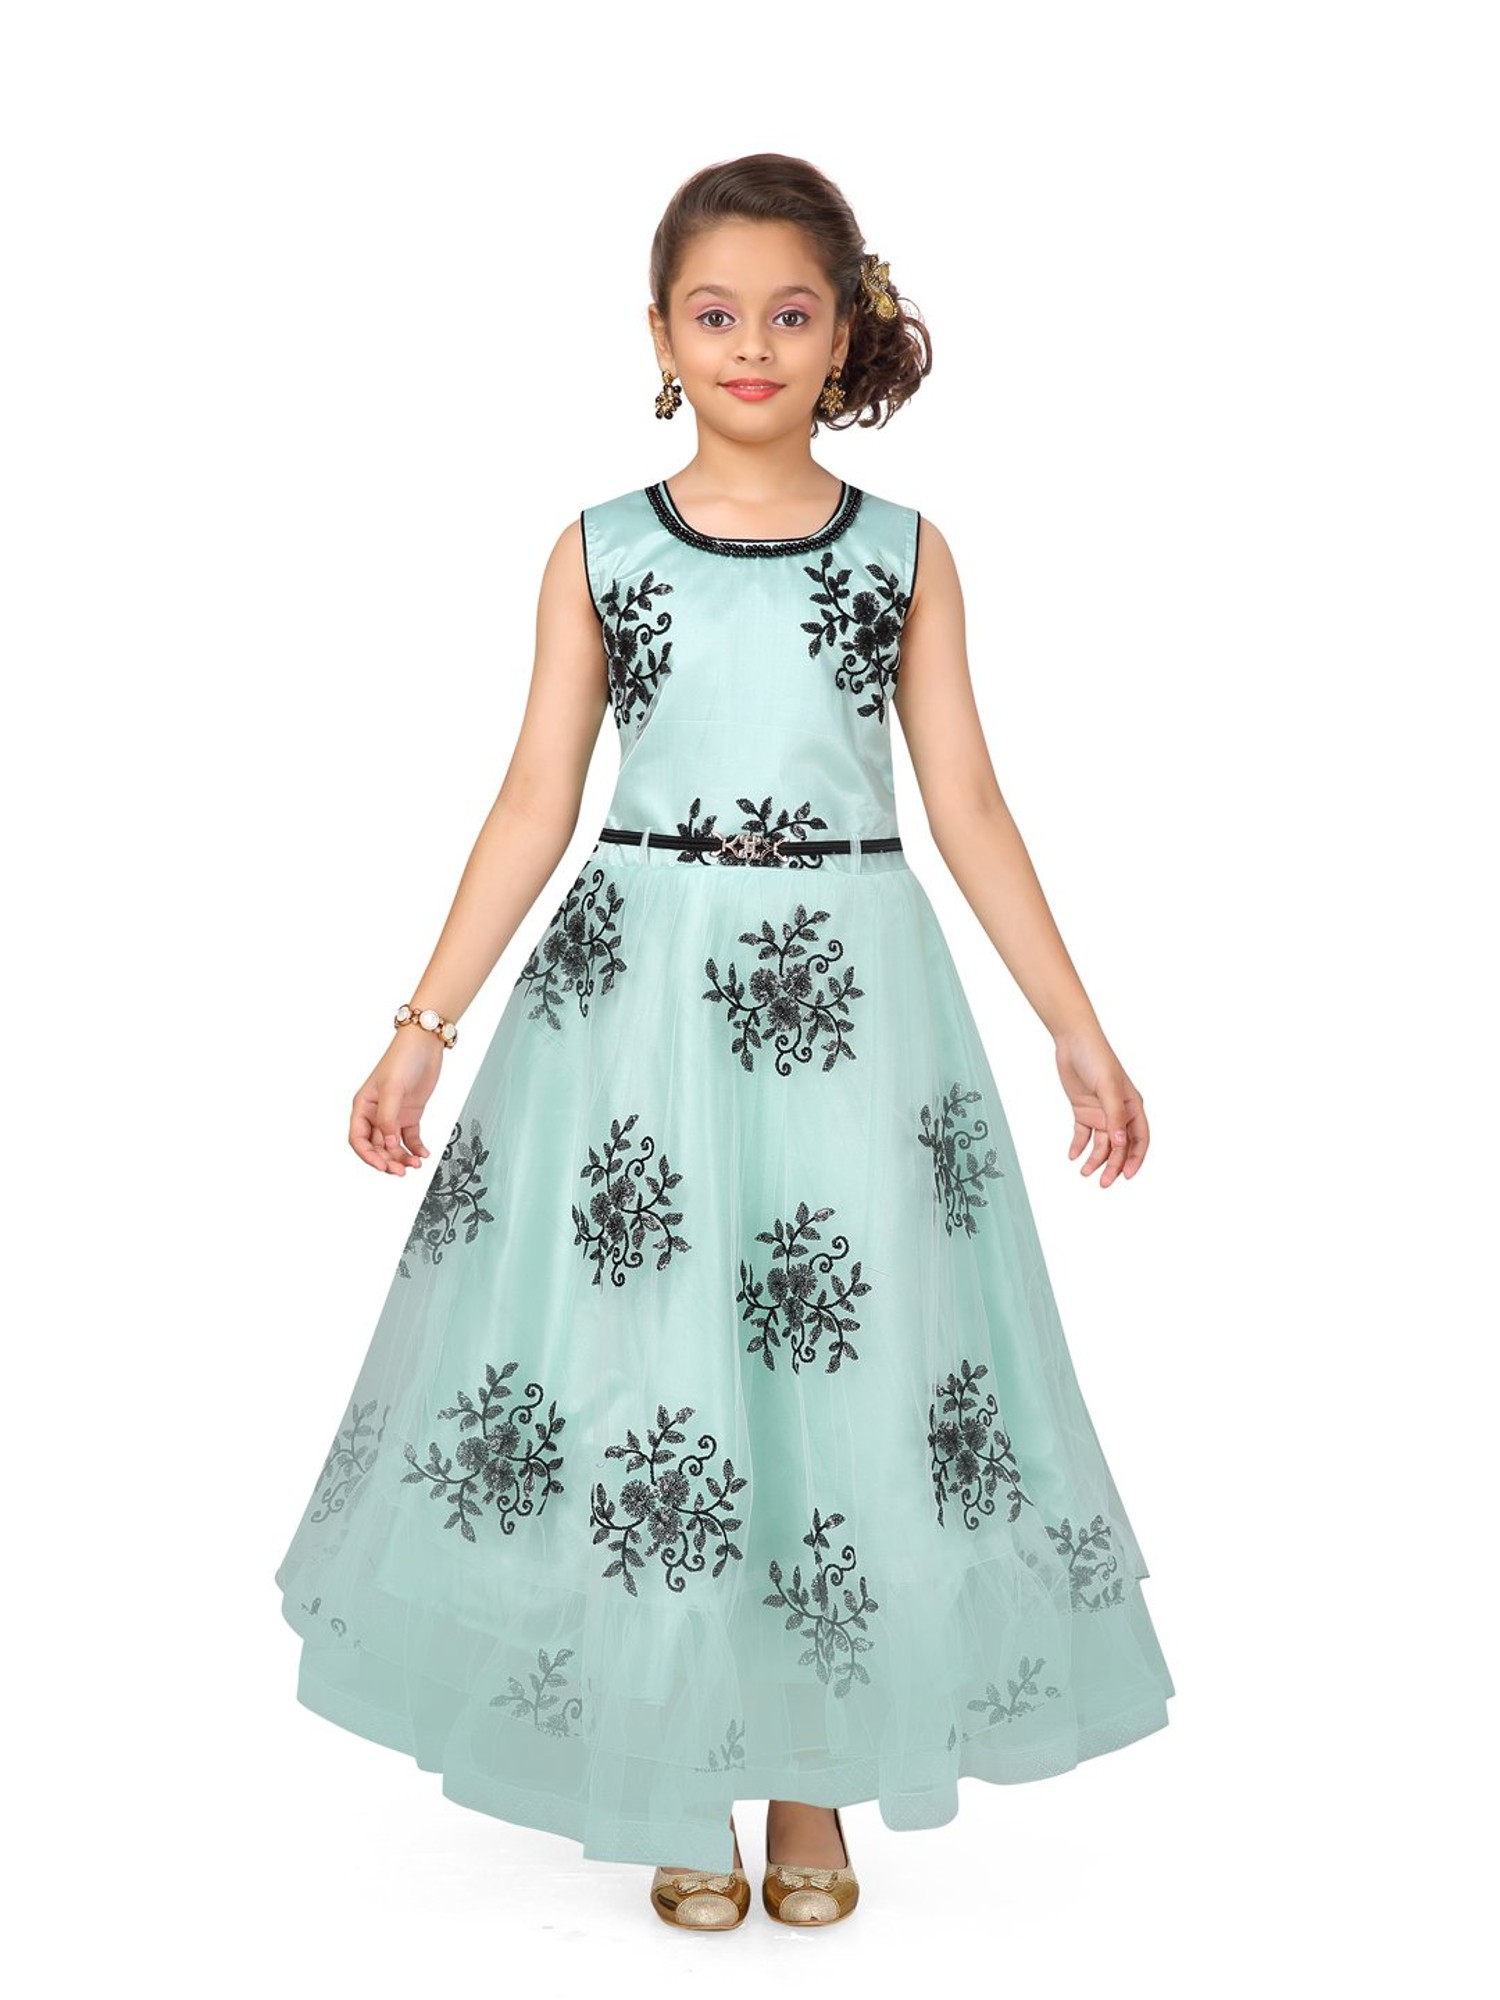 Buy Aarika Girls Self Design Party Wear Frock 5  6 Years Online at Low  Prices in India  Paytmmallcom